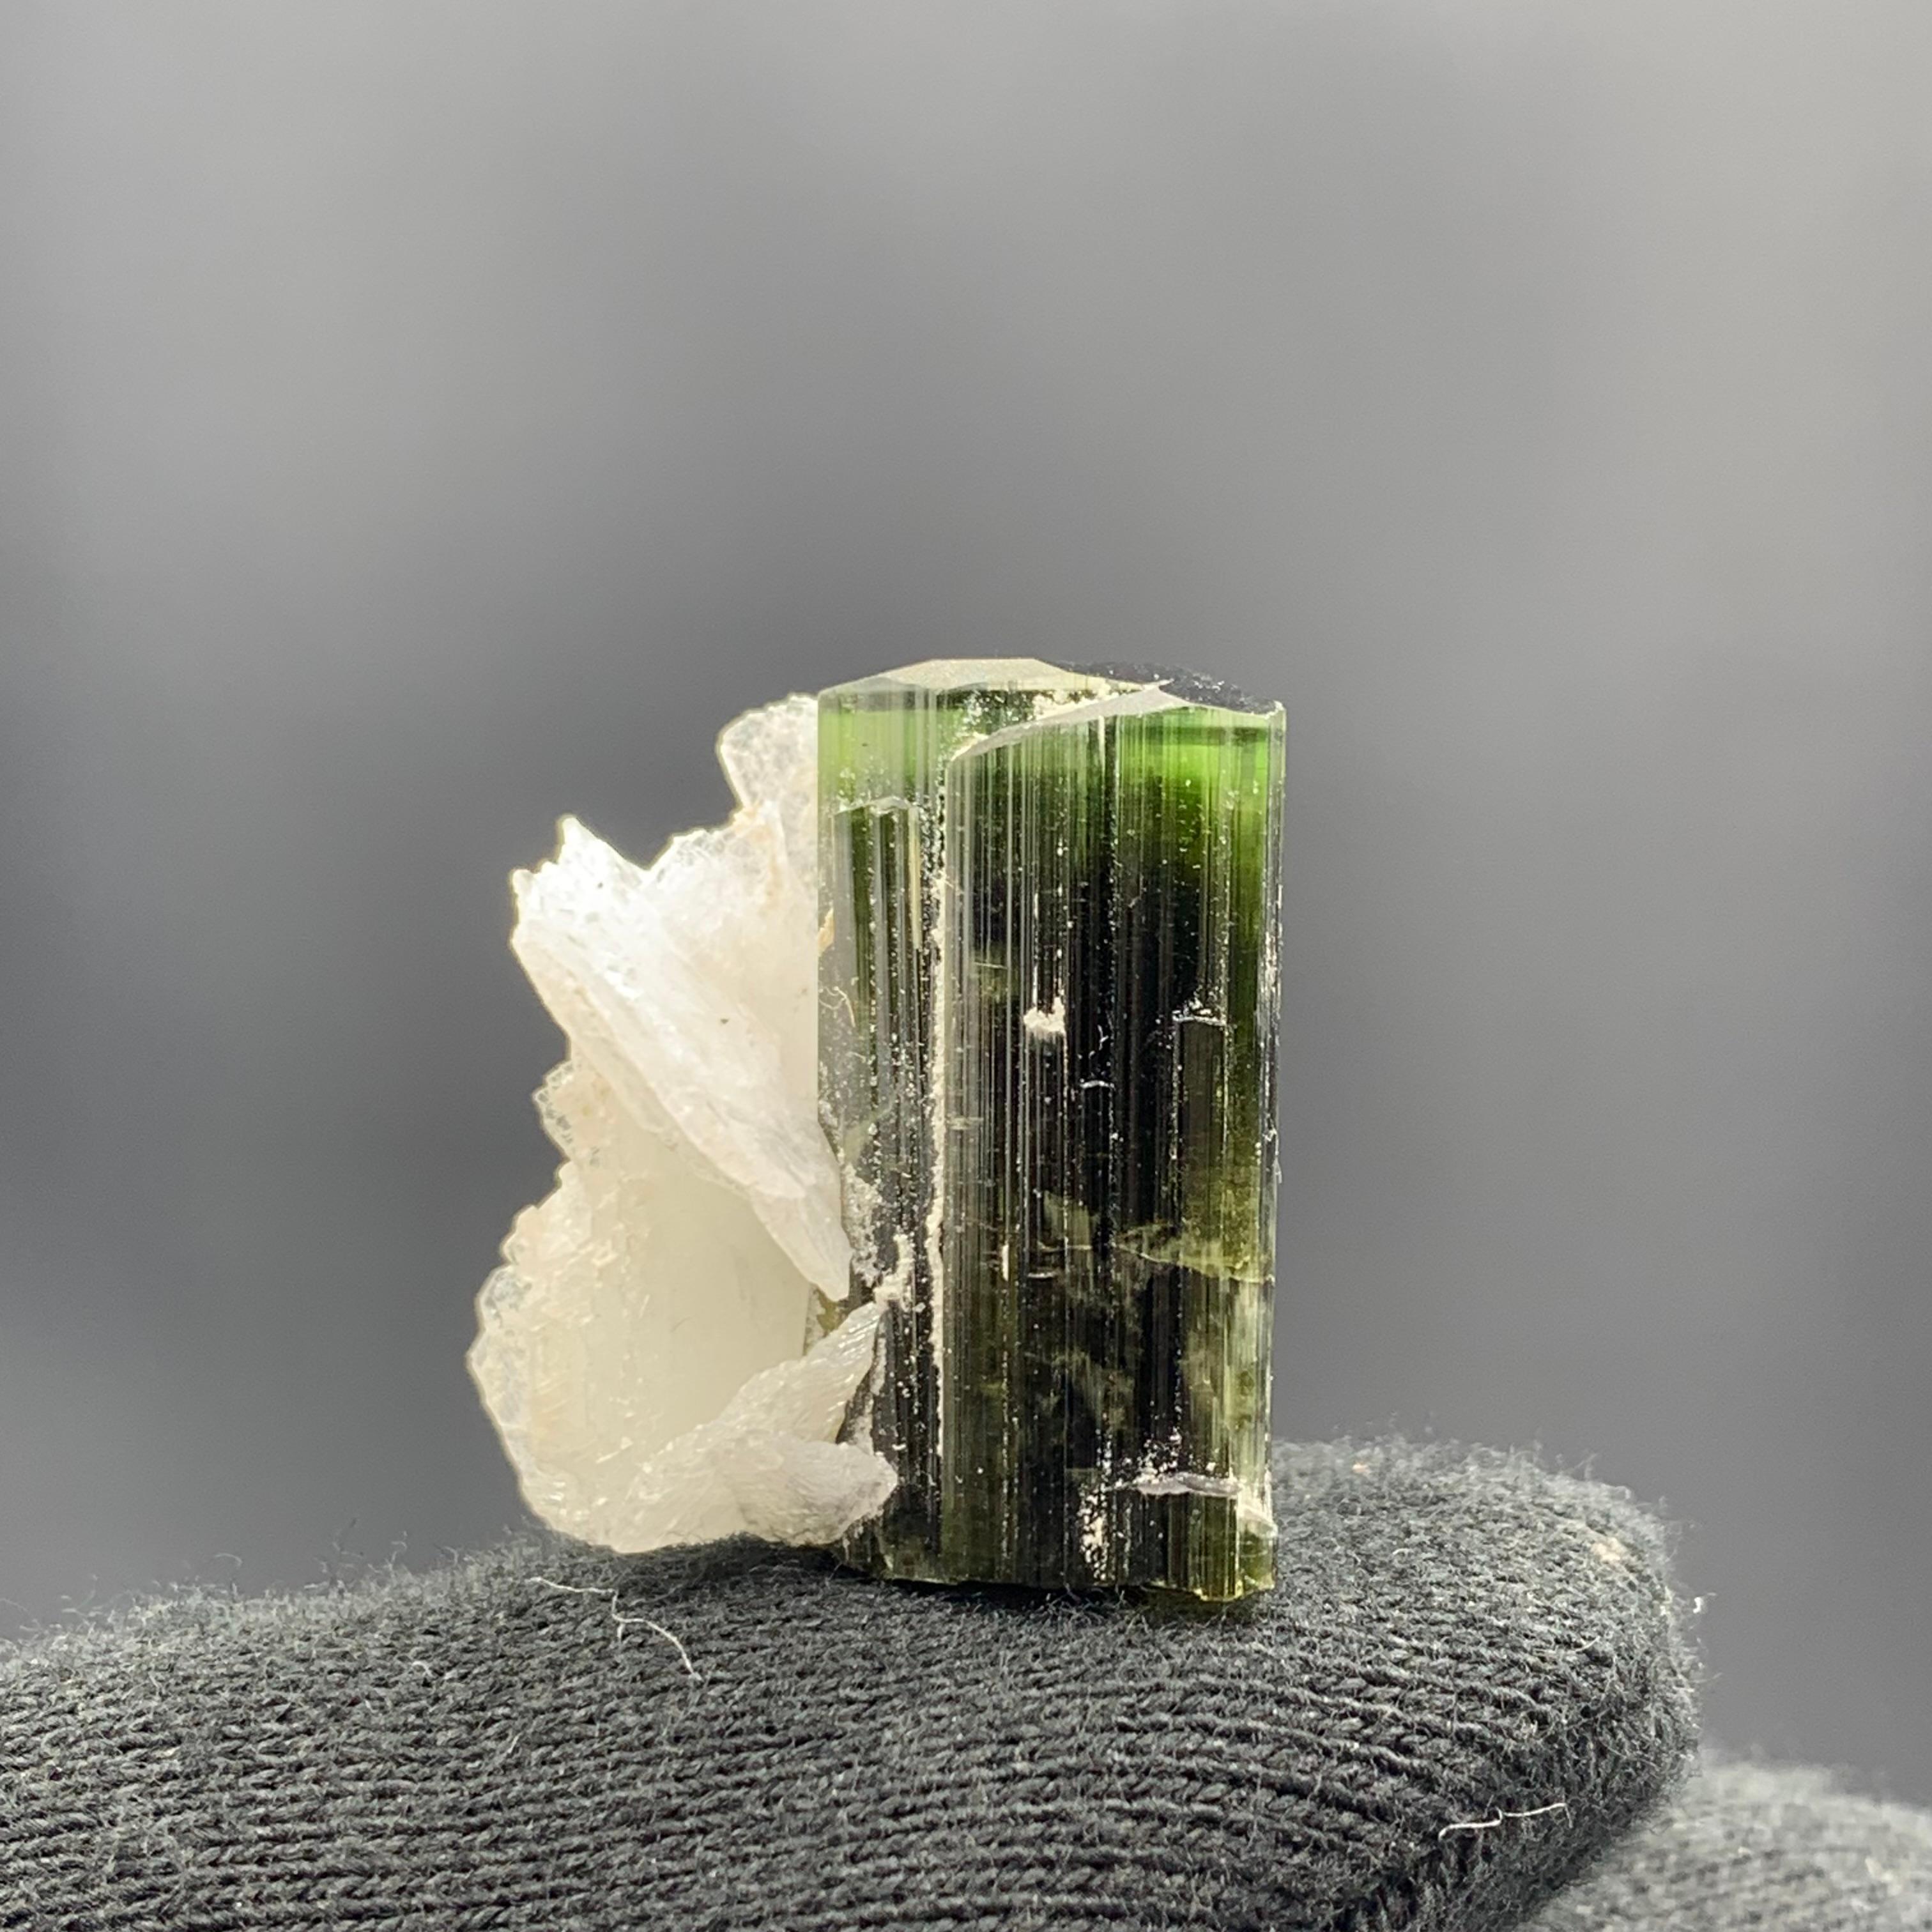 Adam Style 46.95 Cts Lovely Tourmaline With Albite Specimen From Stak Nala Valley, Pakistan For Sale